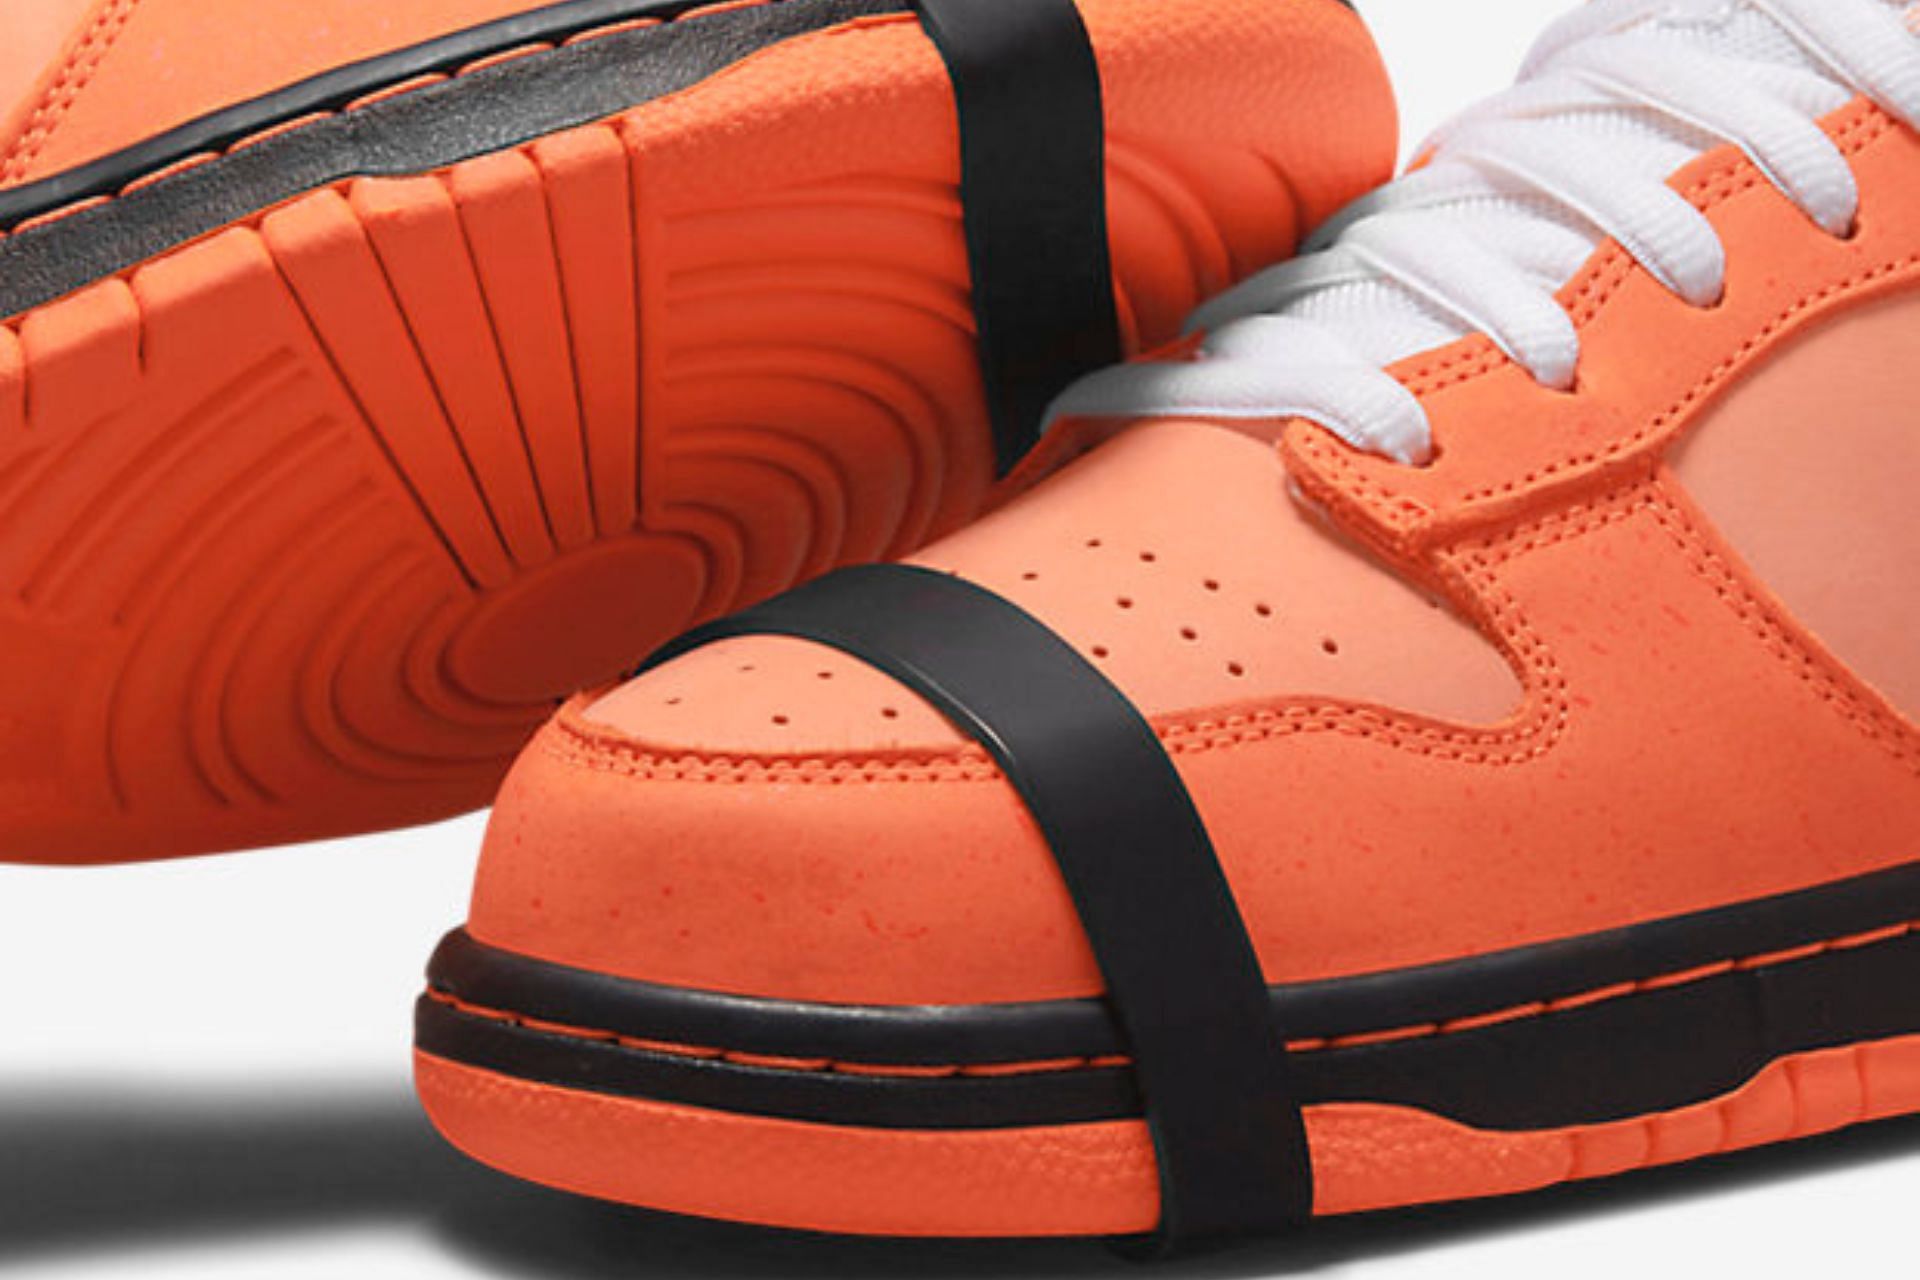 Take a closer look at the sleek toe tops of the upcoming Nike SB Dunk Low shoes (Image via Nike)